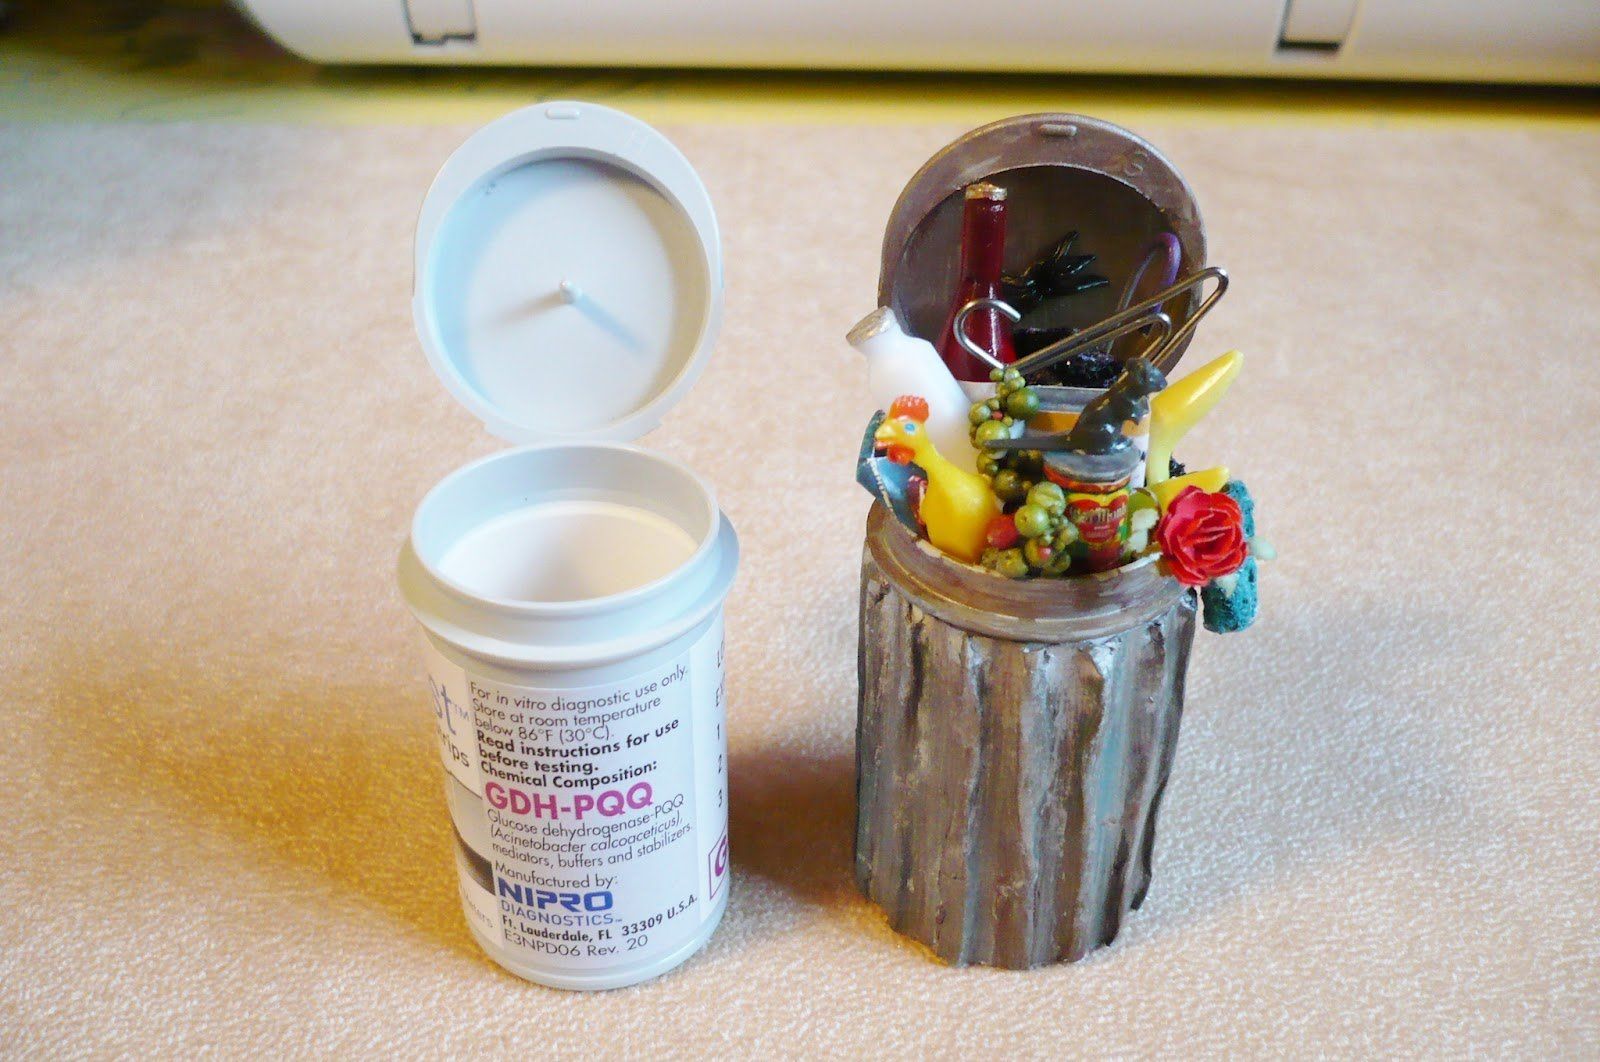 Diabetes fund drive using empty test strip containers